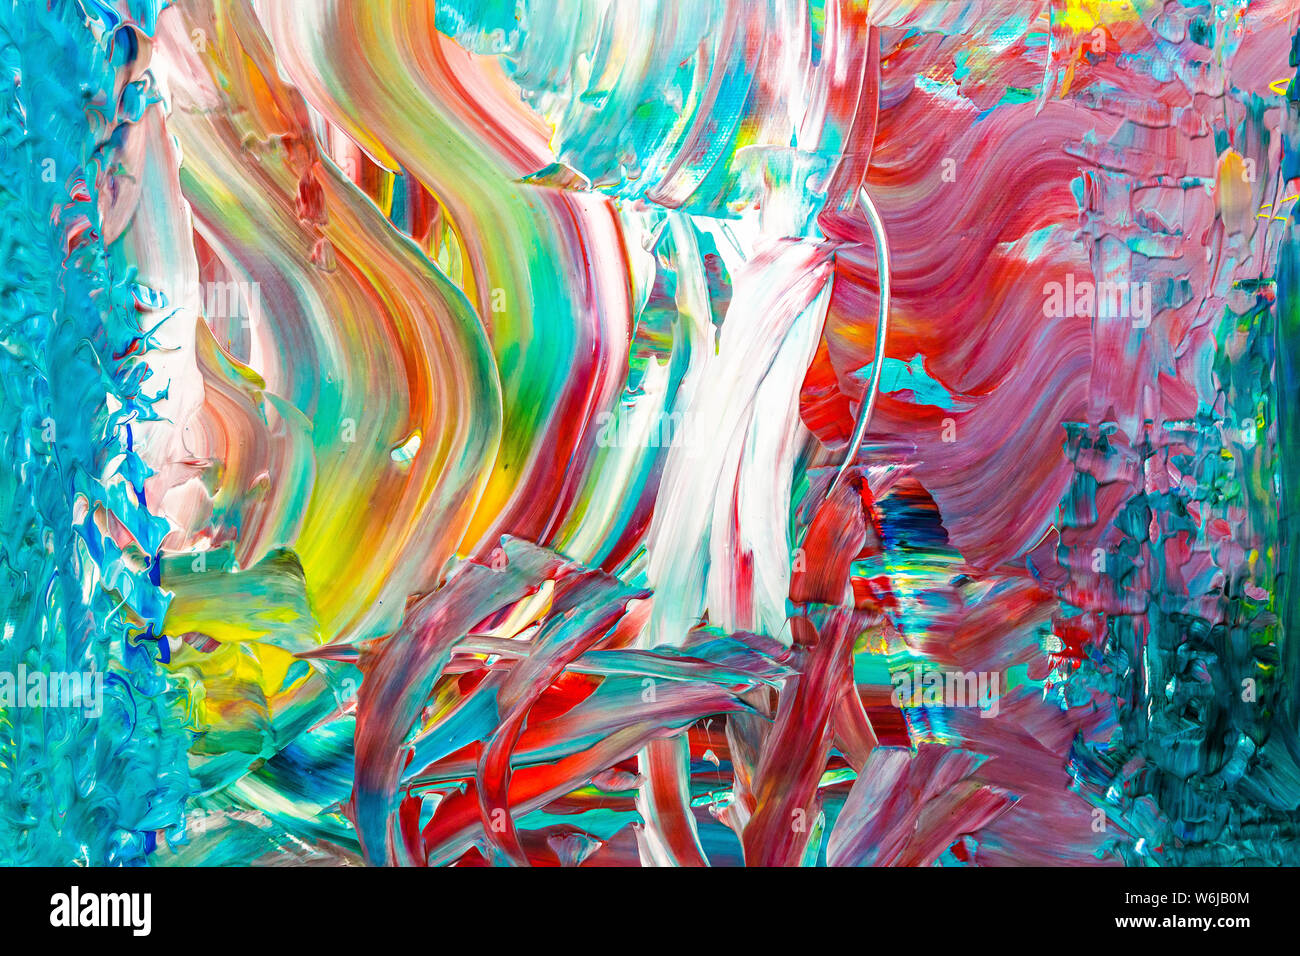 Abstract Close-up Of Acrylic Paint Canvas Print